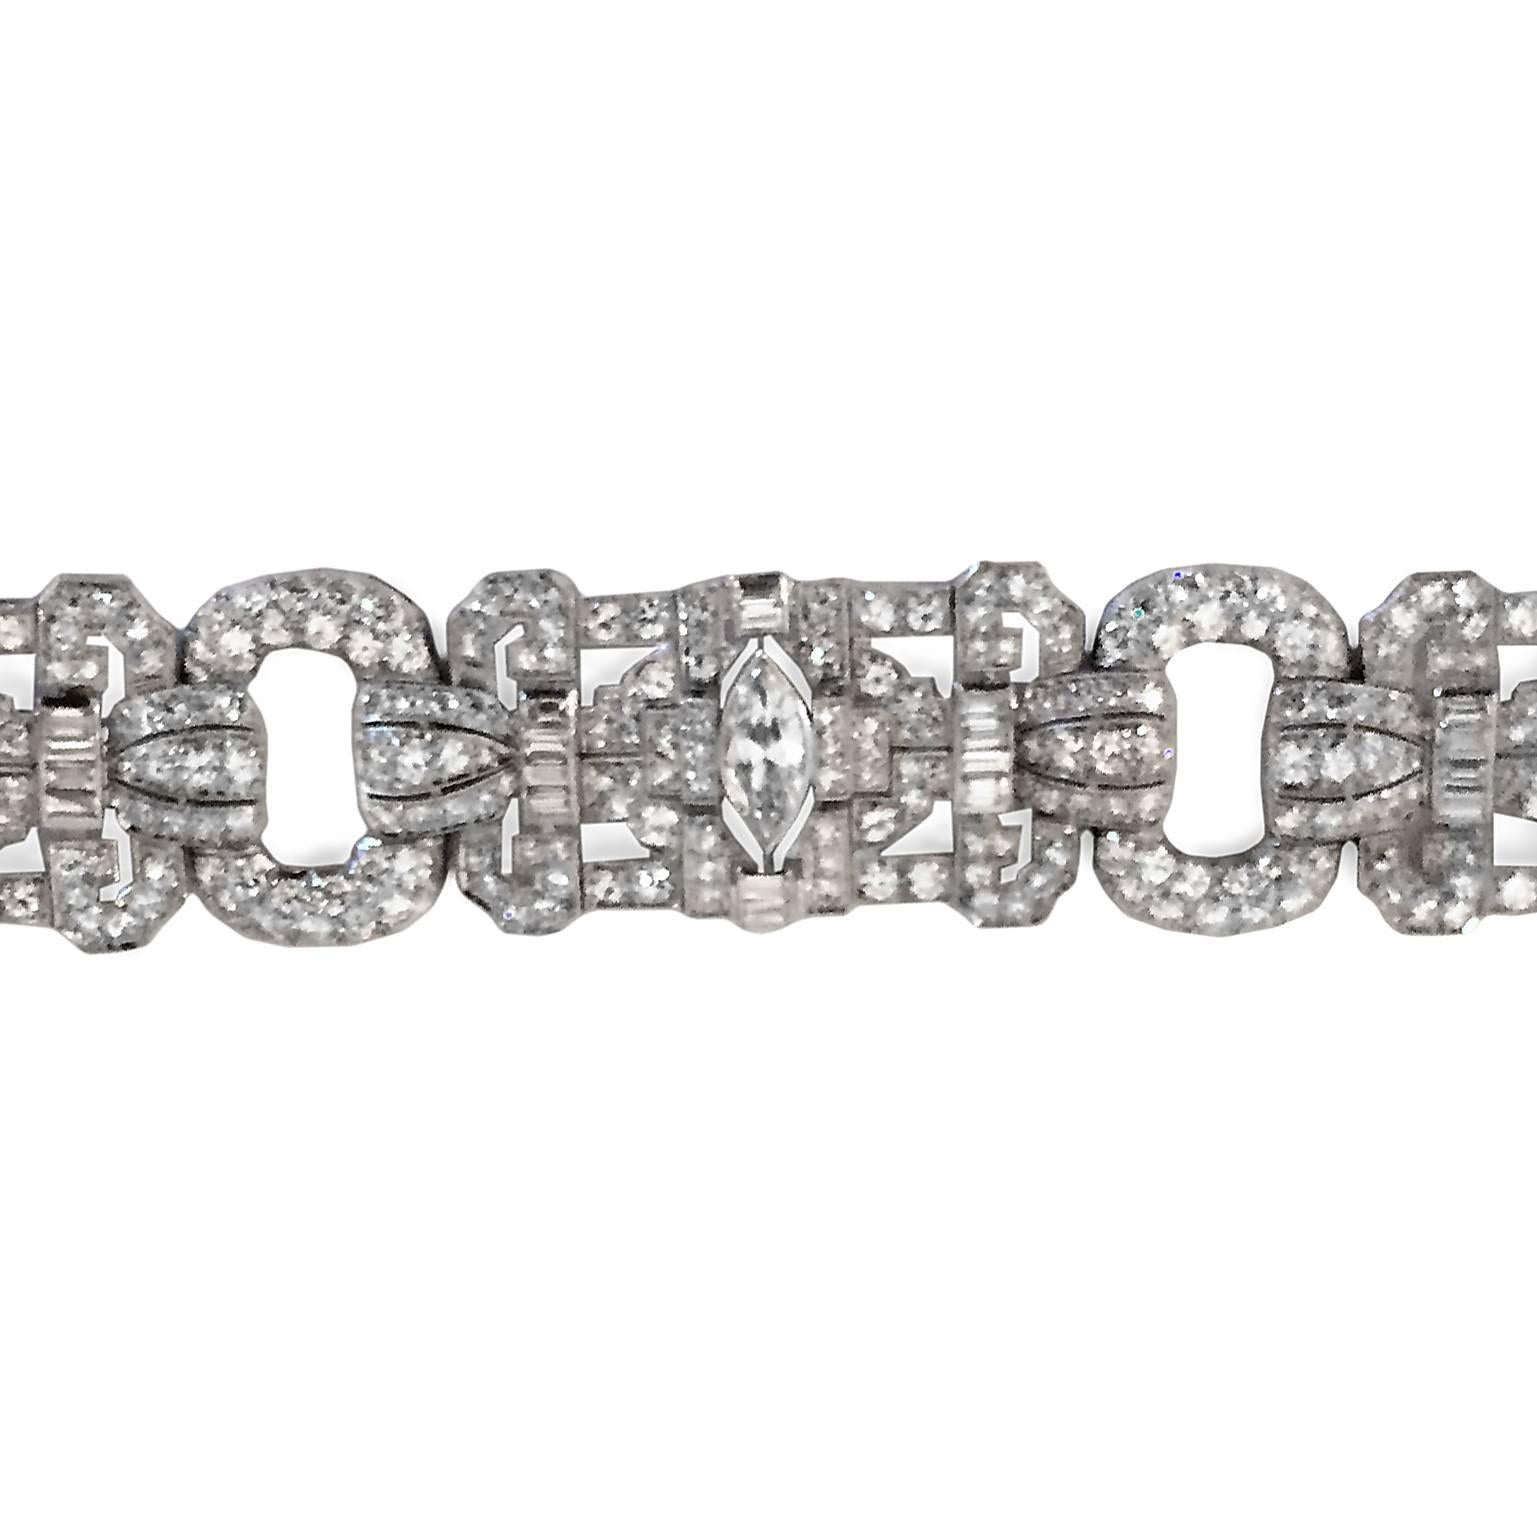 This original French Deco masterpiece features three large marquis-cut diamonds of 1.25 carats each, H color VS grade, surrounded by an additional 14 carats of diamonds. French jewelry maker's markings attest to authenticity. Definitely "Oscar